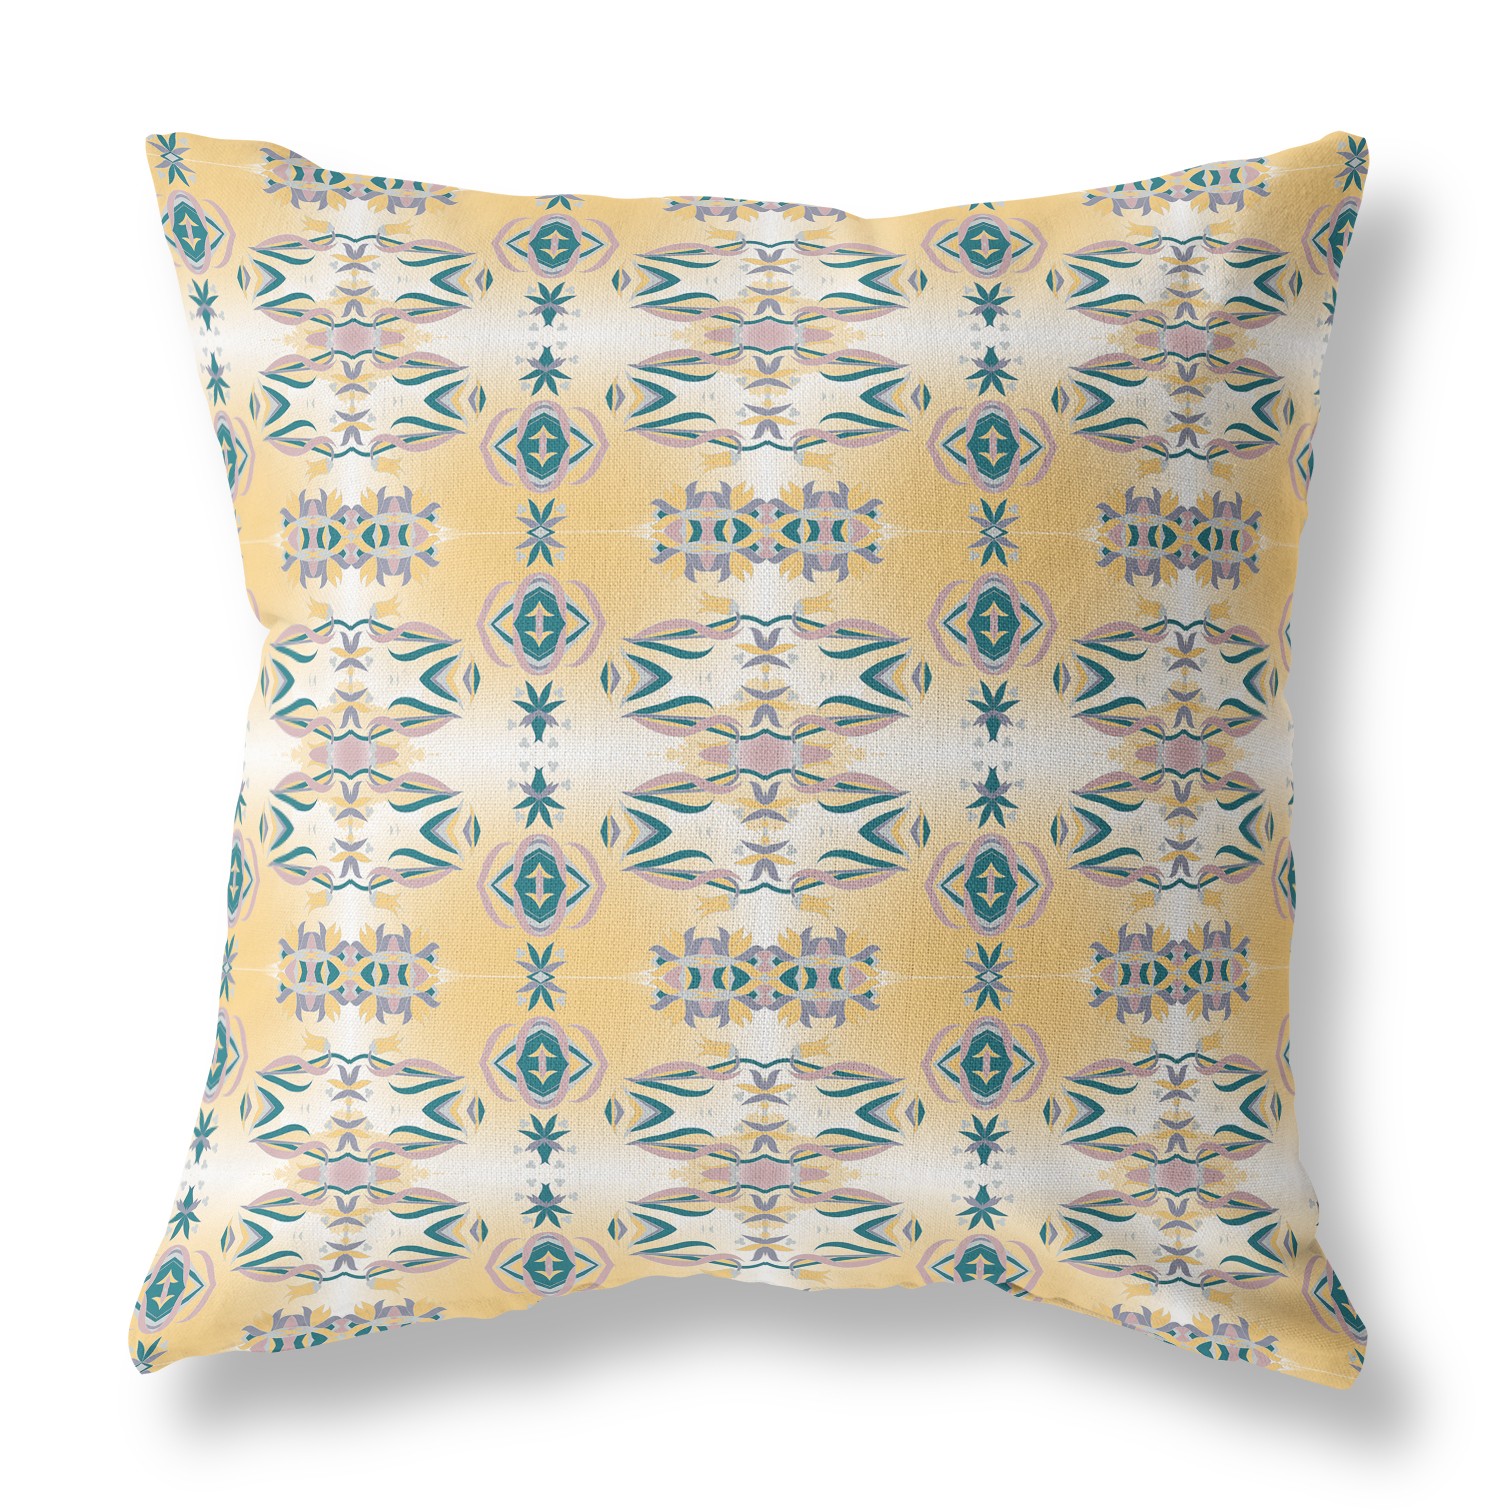 26” Tan Blue Patterned Indoor Outdoor Zippered Throw Pillow-411068-1